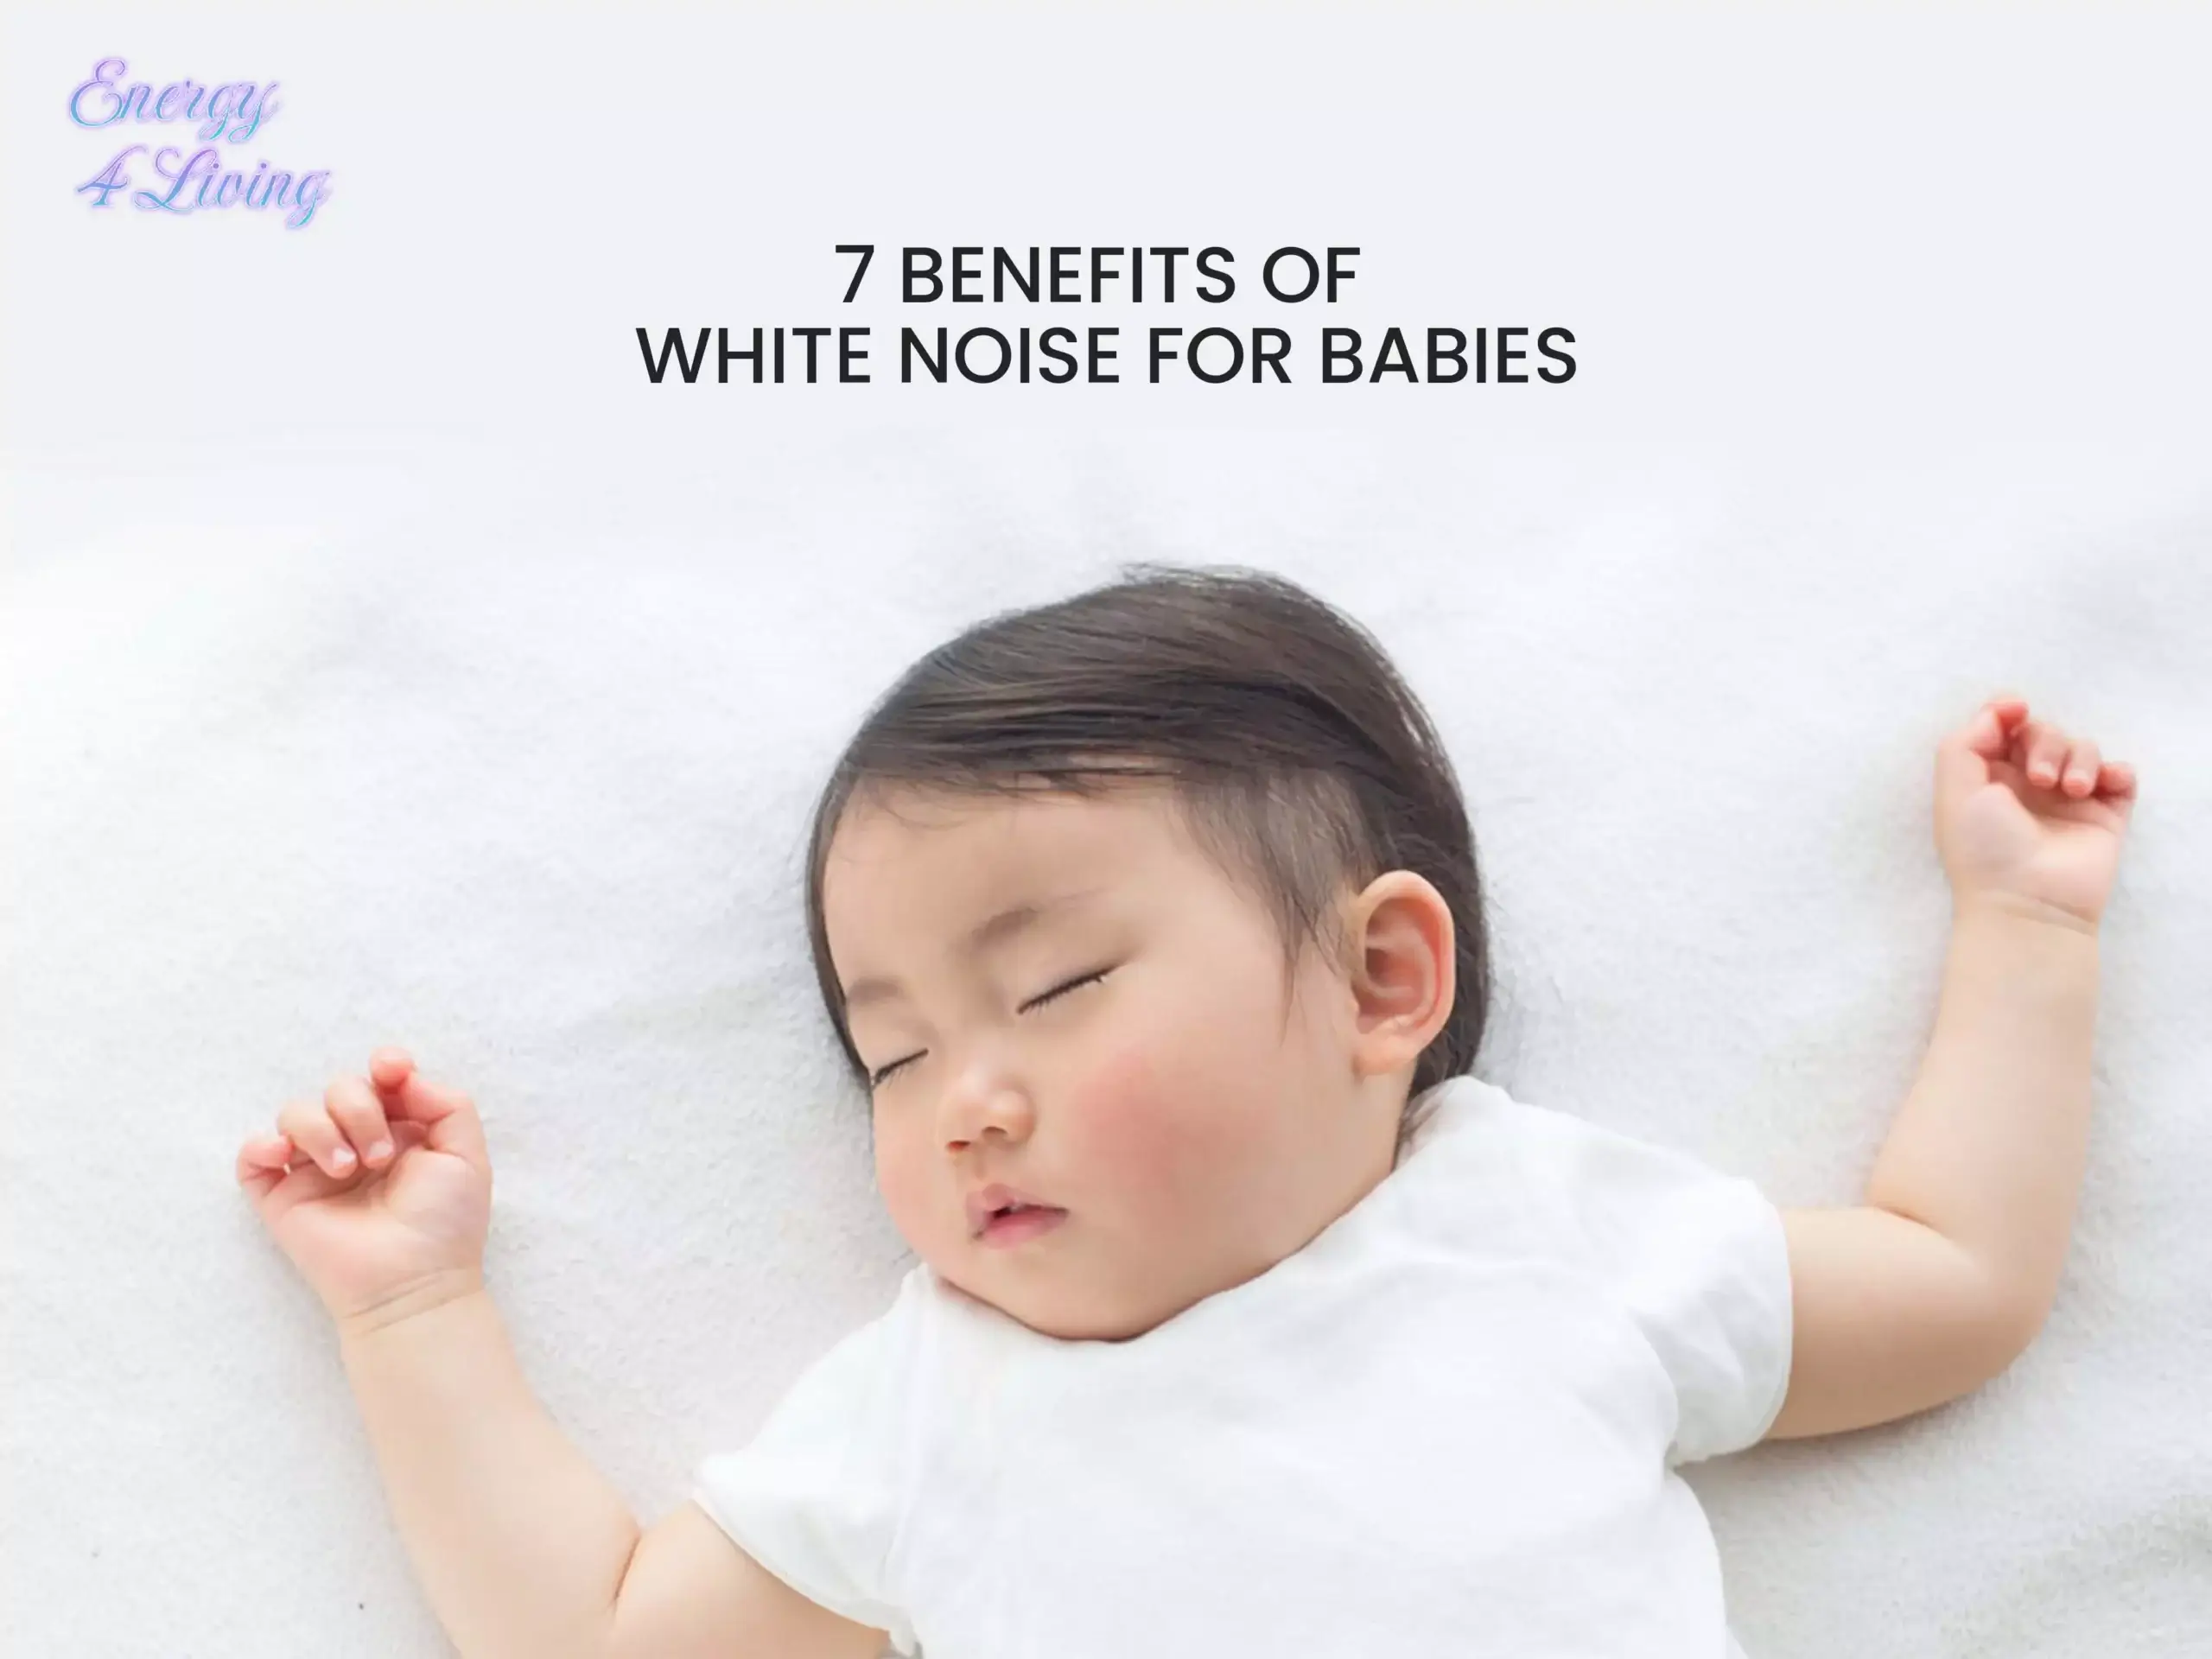 7 Benefits of White Noise for Babies